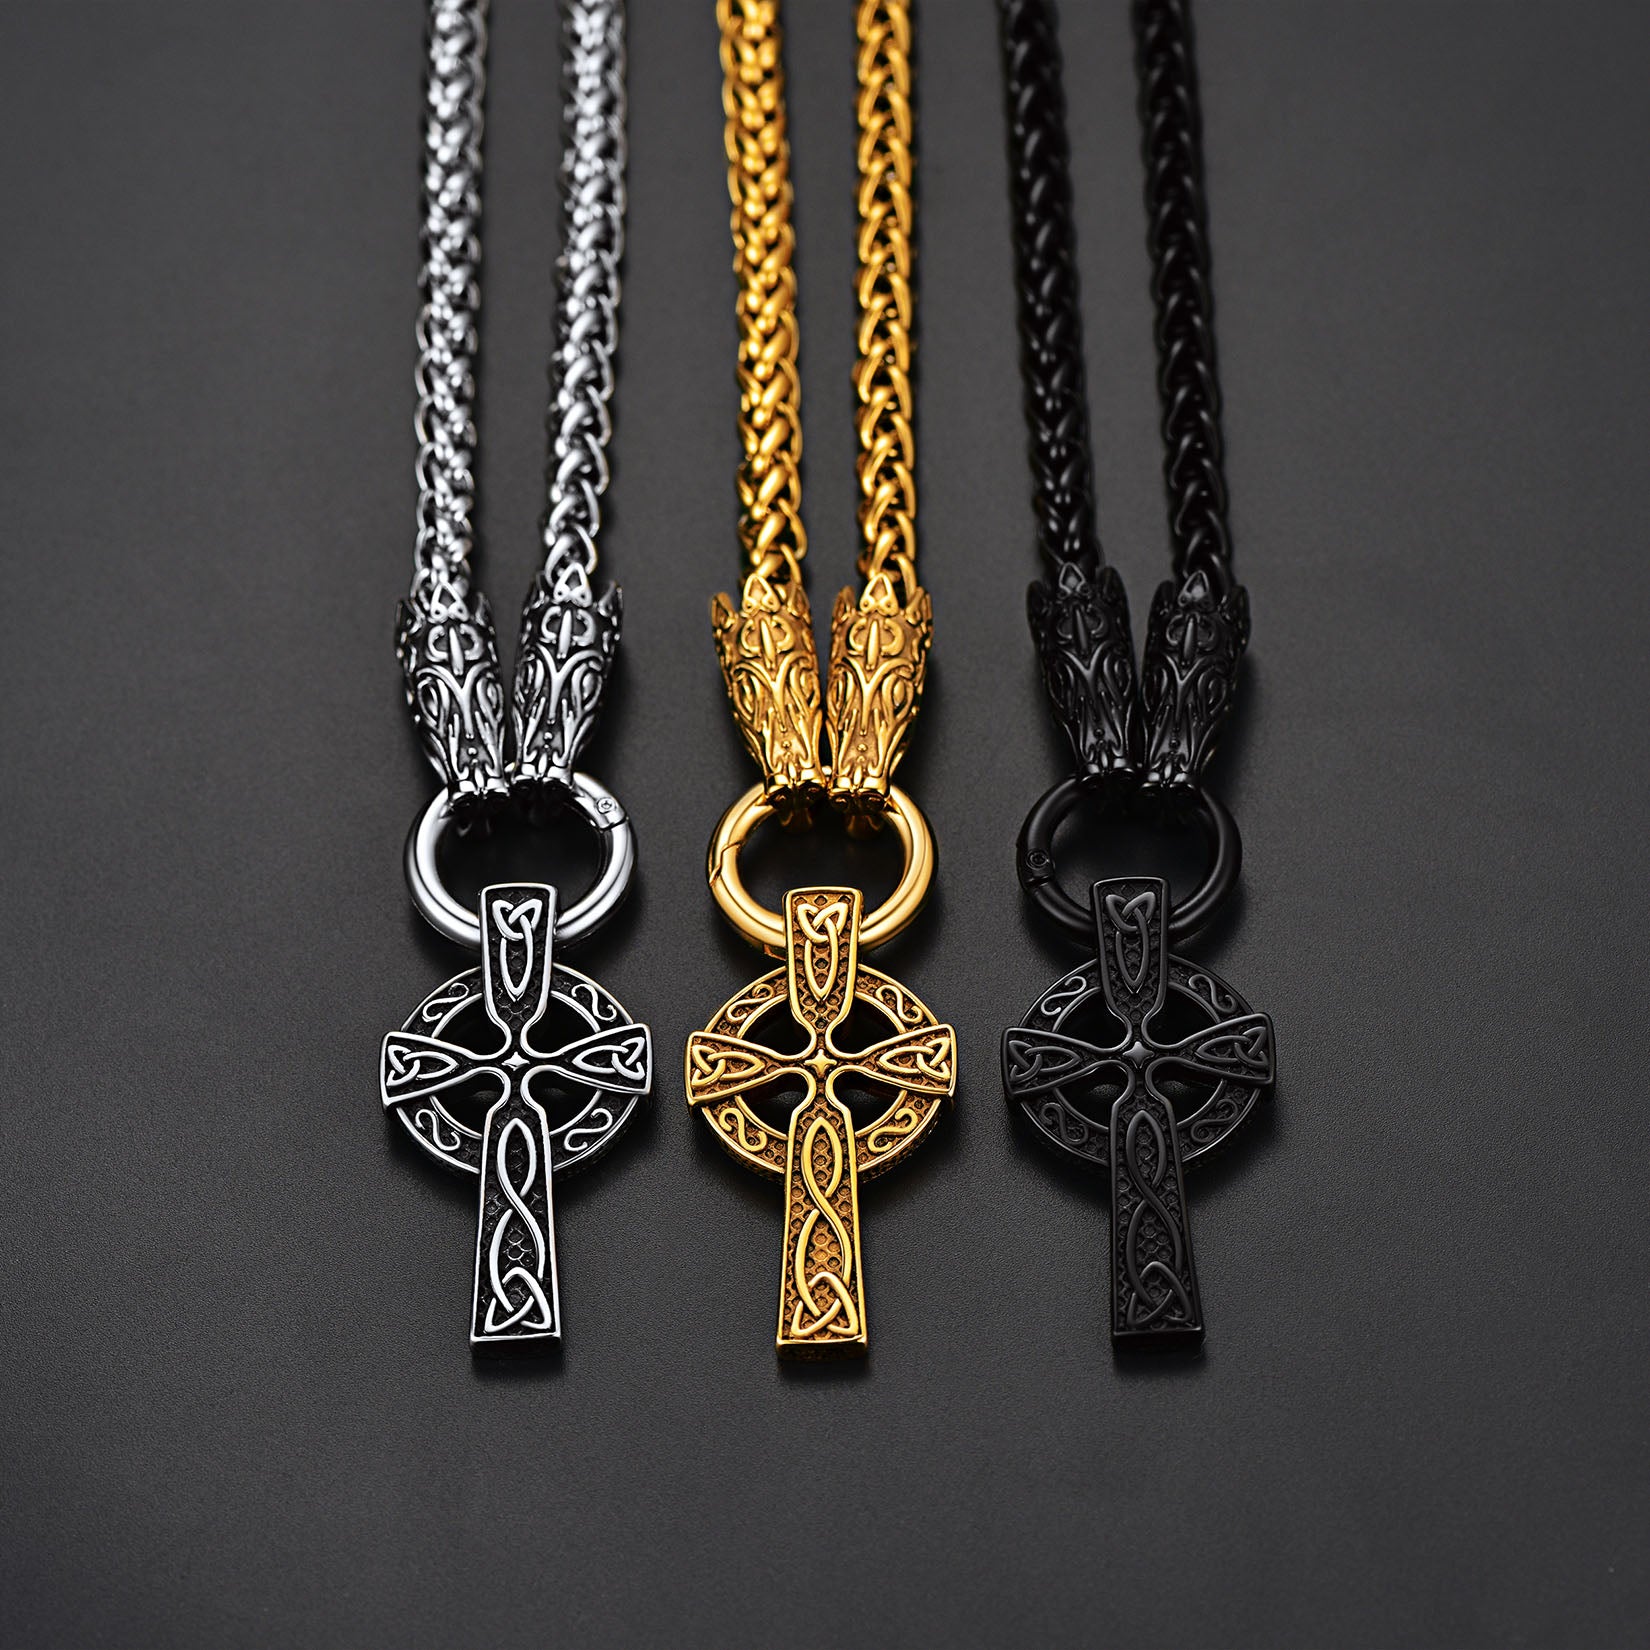 FaithHeart Celtic Knot Cross Necklace With Wolf Rope Chain For Men FaithHeart